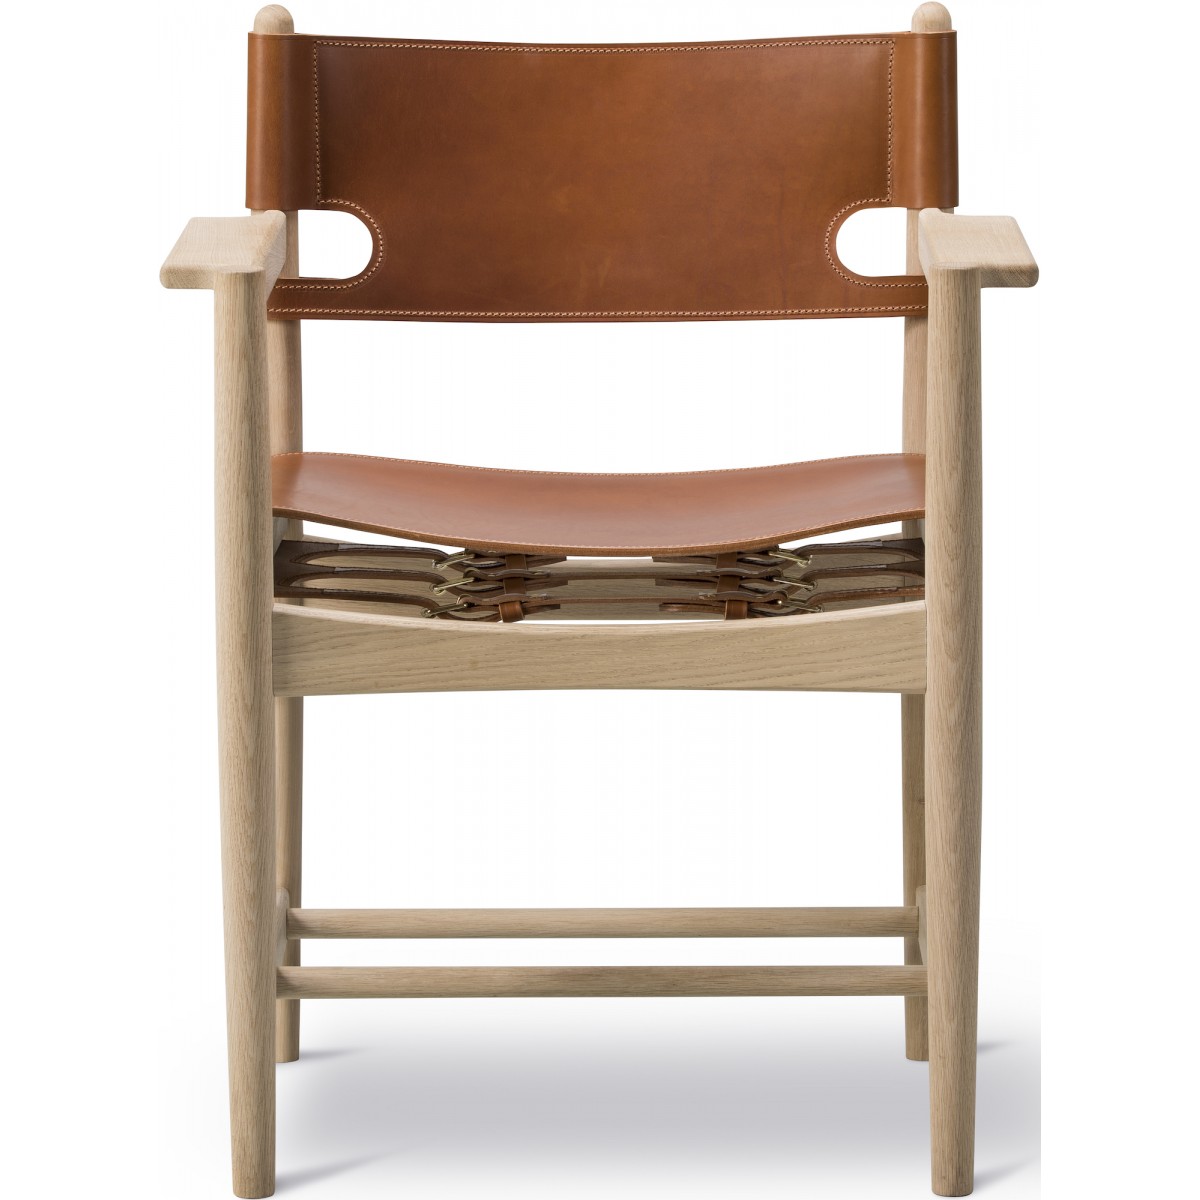 SOLD OUT cognac leather / soaped oak - Spanish dining chair 3238 (with armrests)